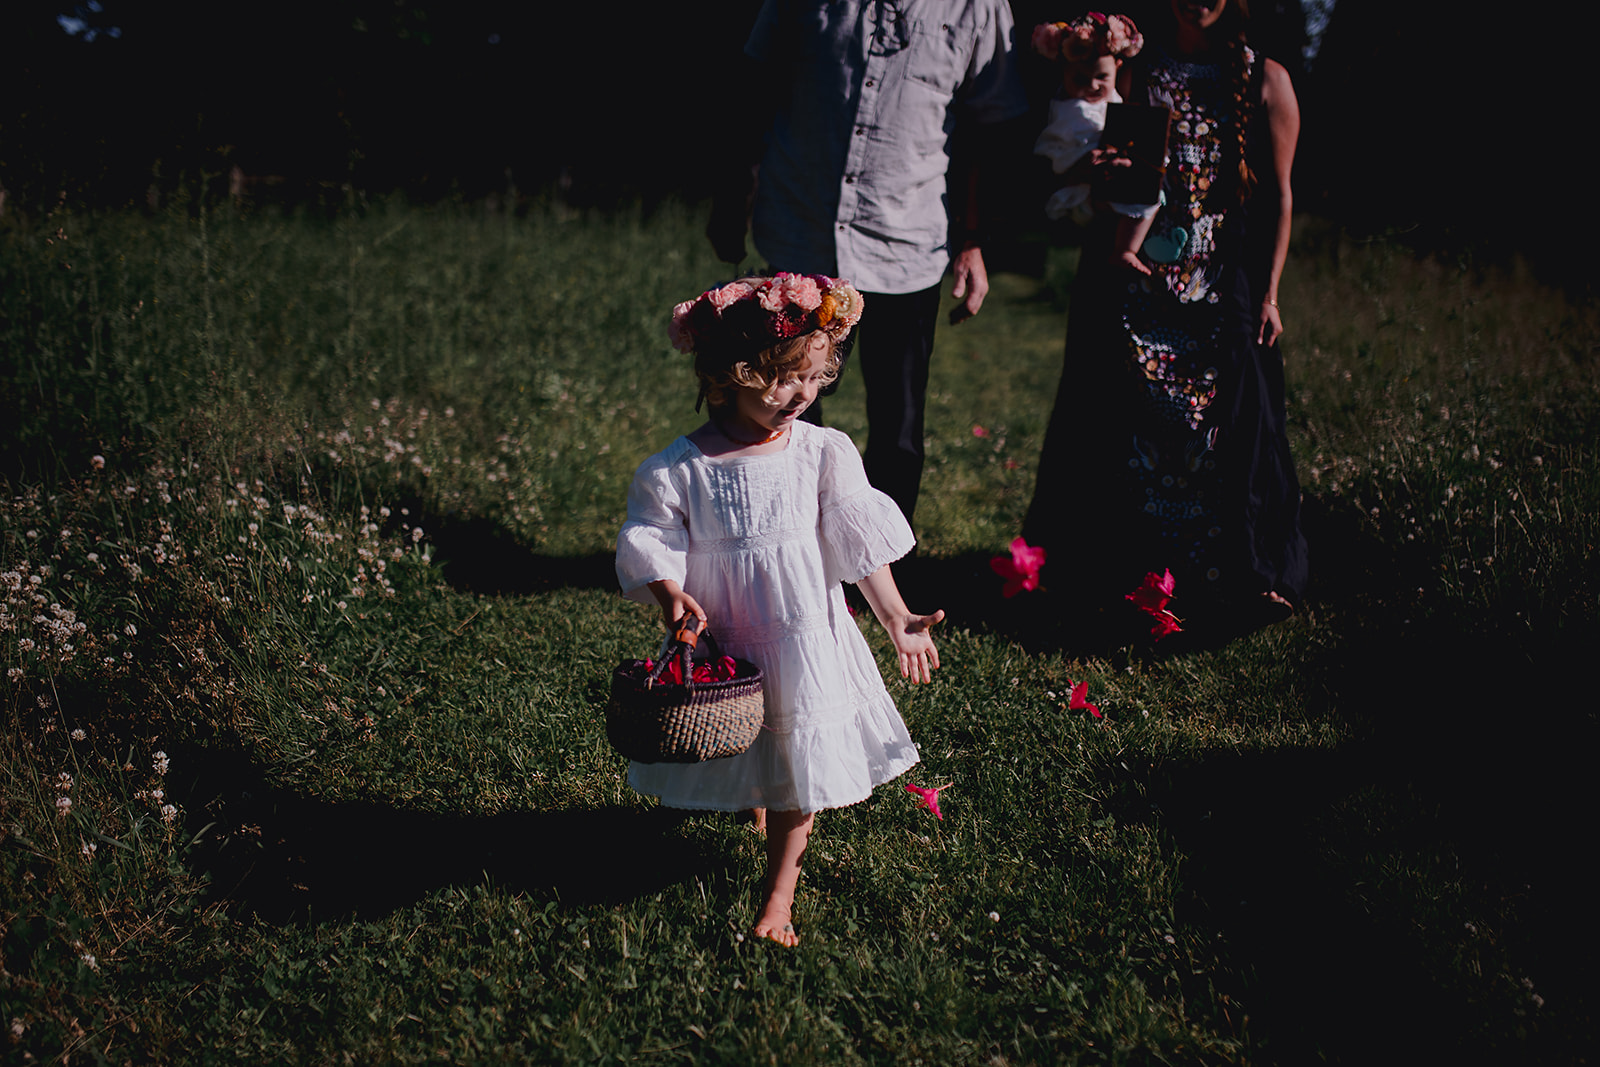 Red petals contrasted against green grass being thrown by five year old flower girl walking in field.